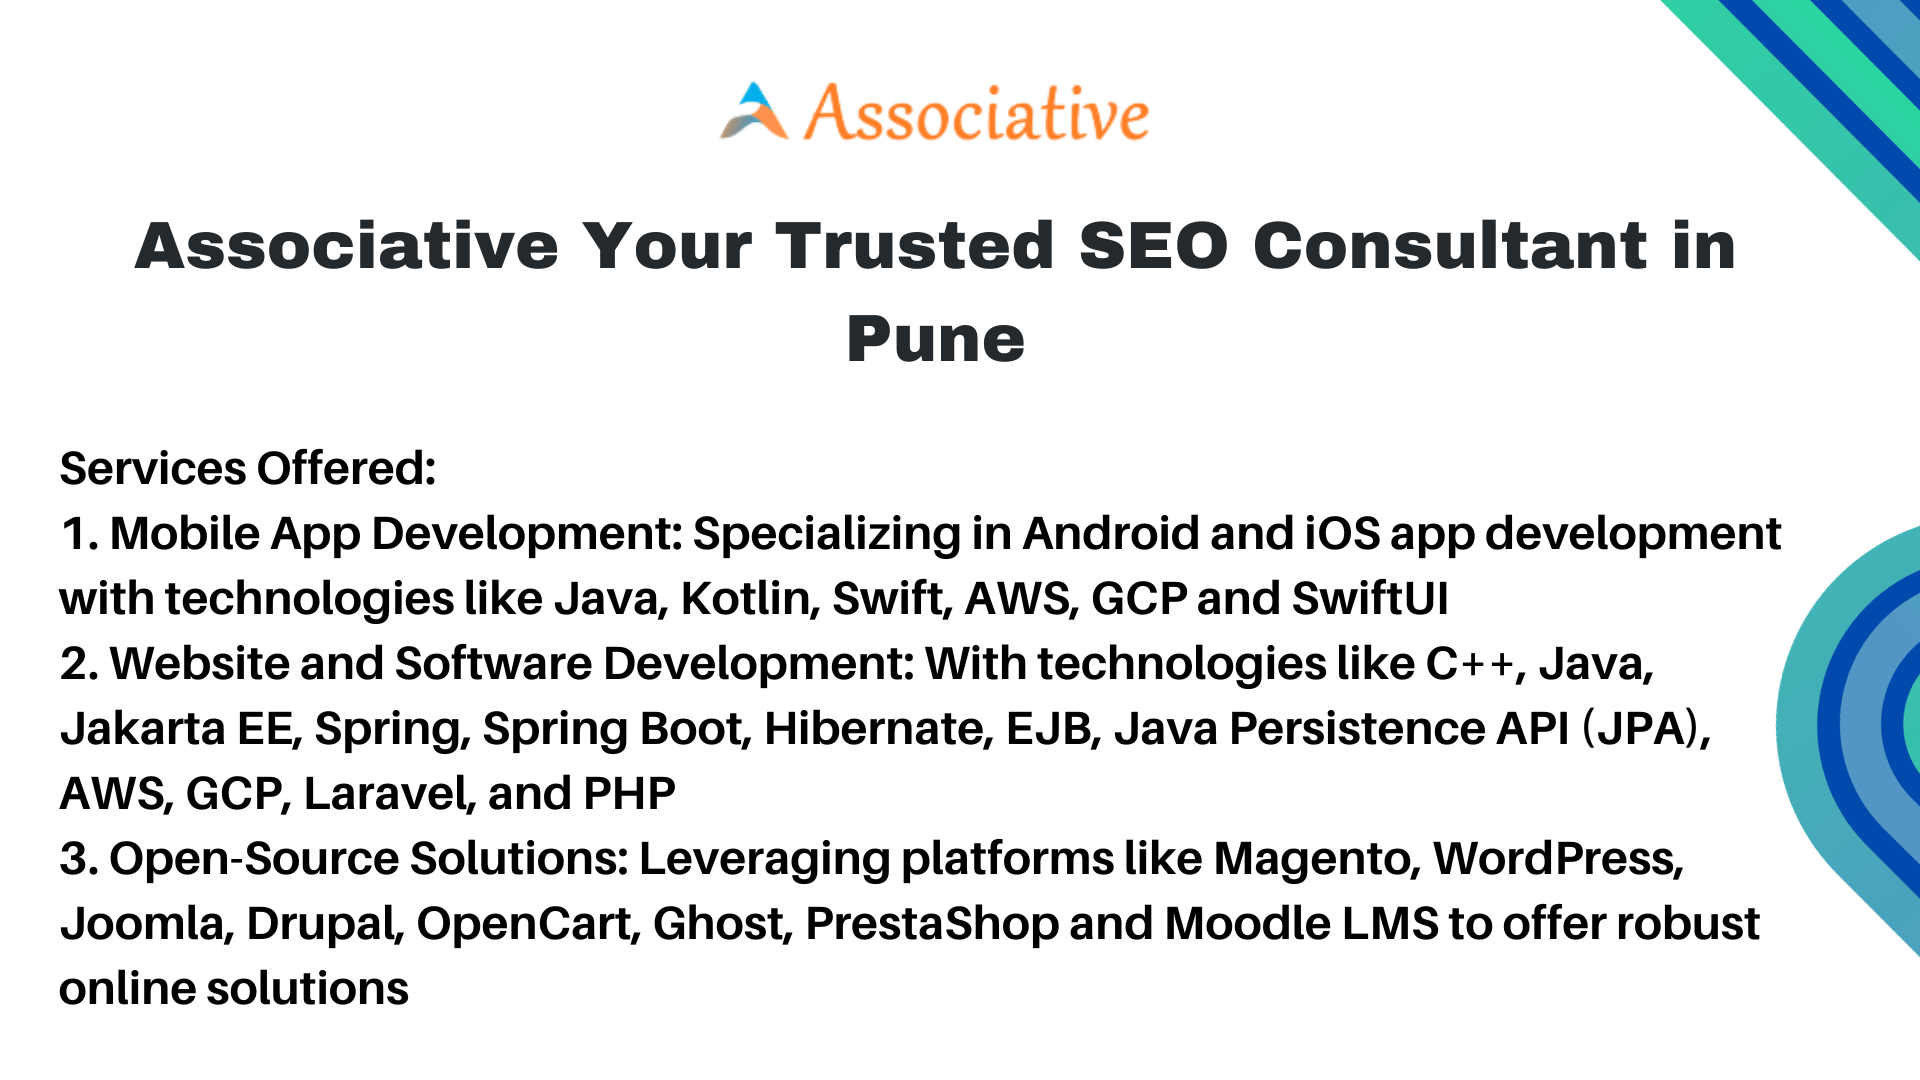 Associative Your Trusted SEO Consultant in Pune